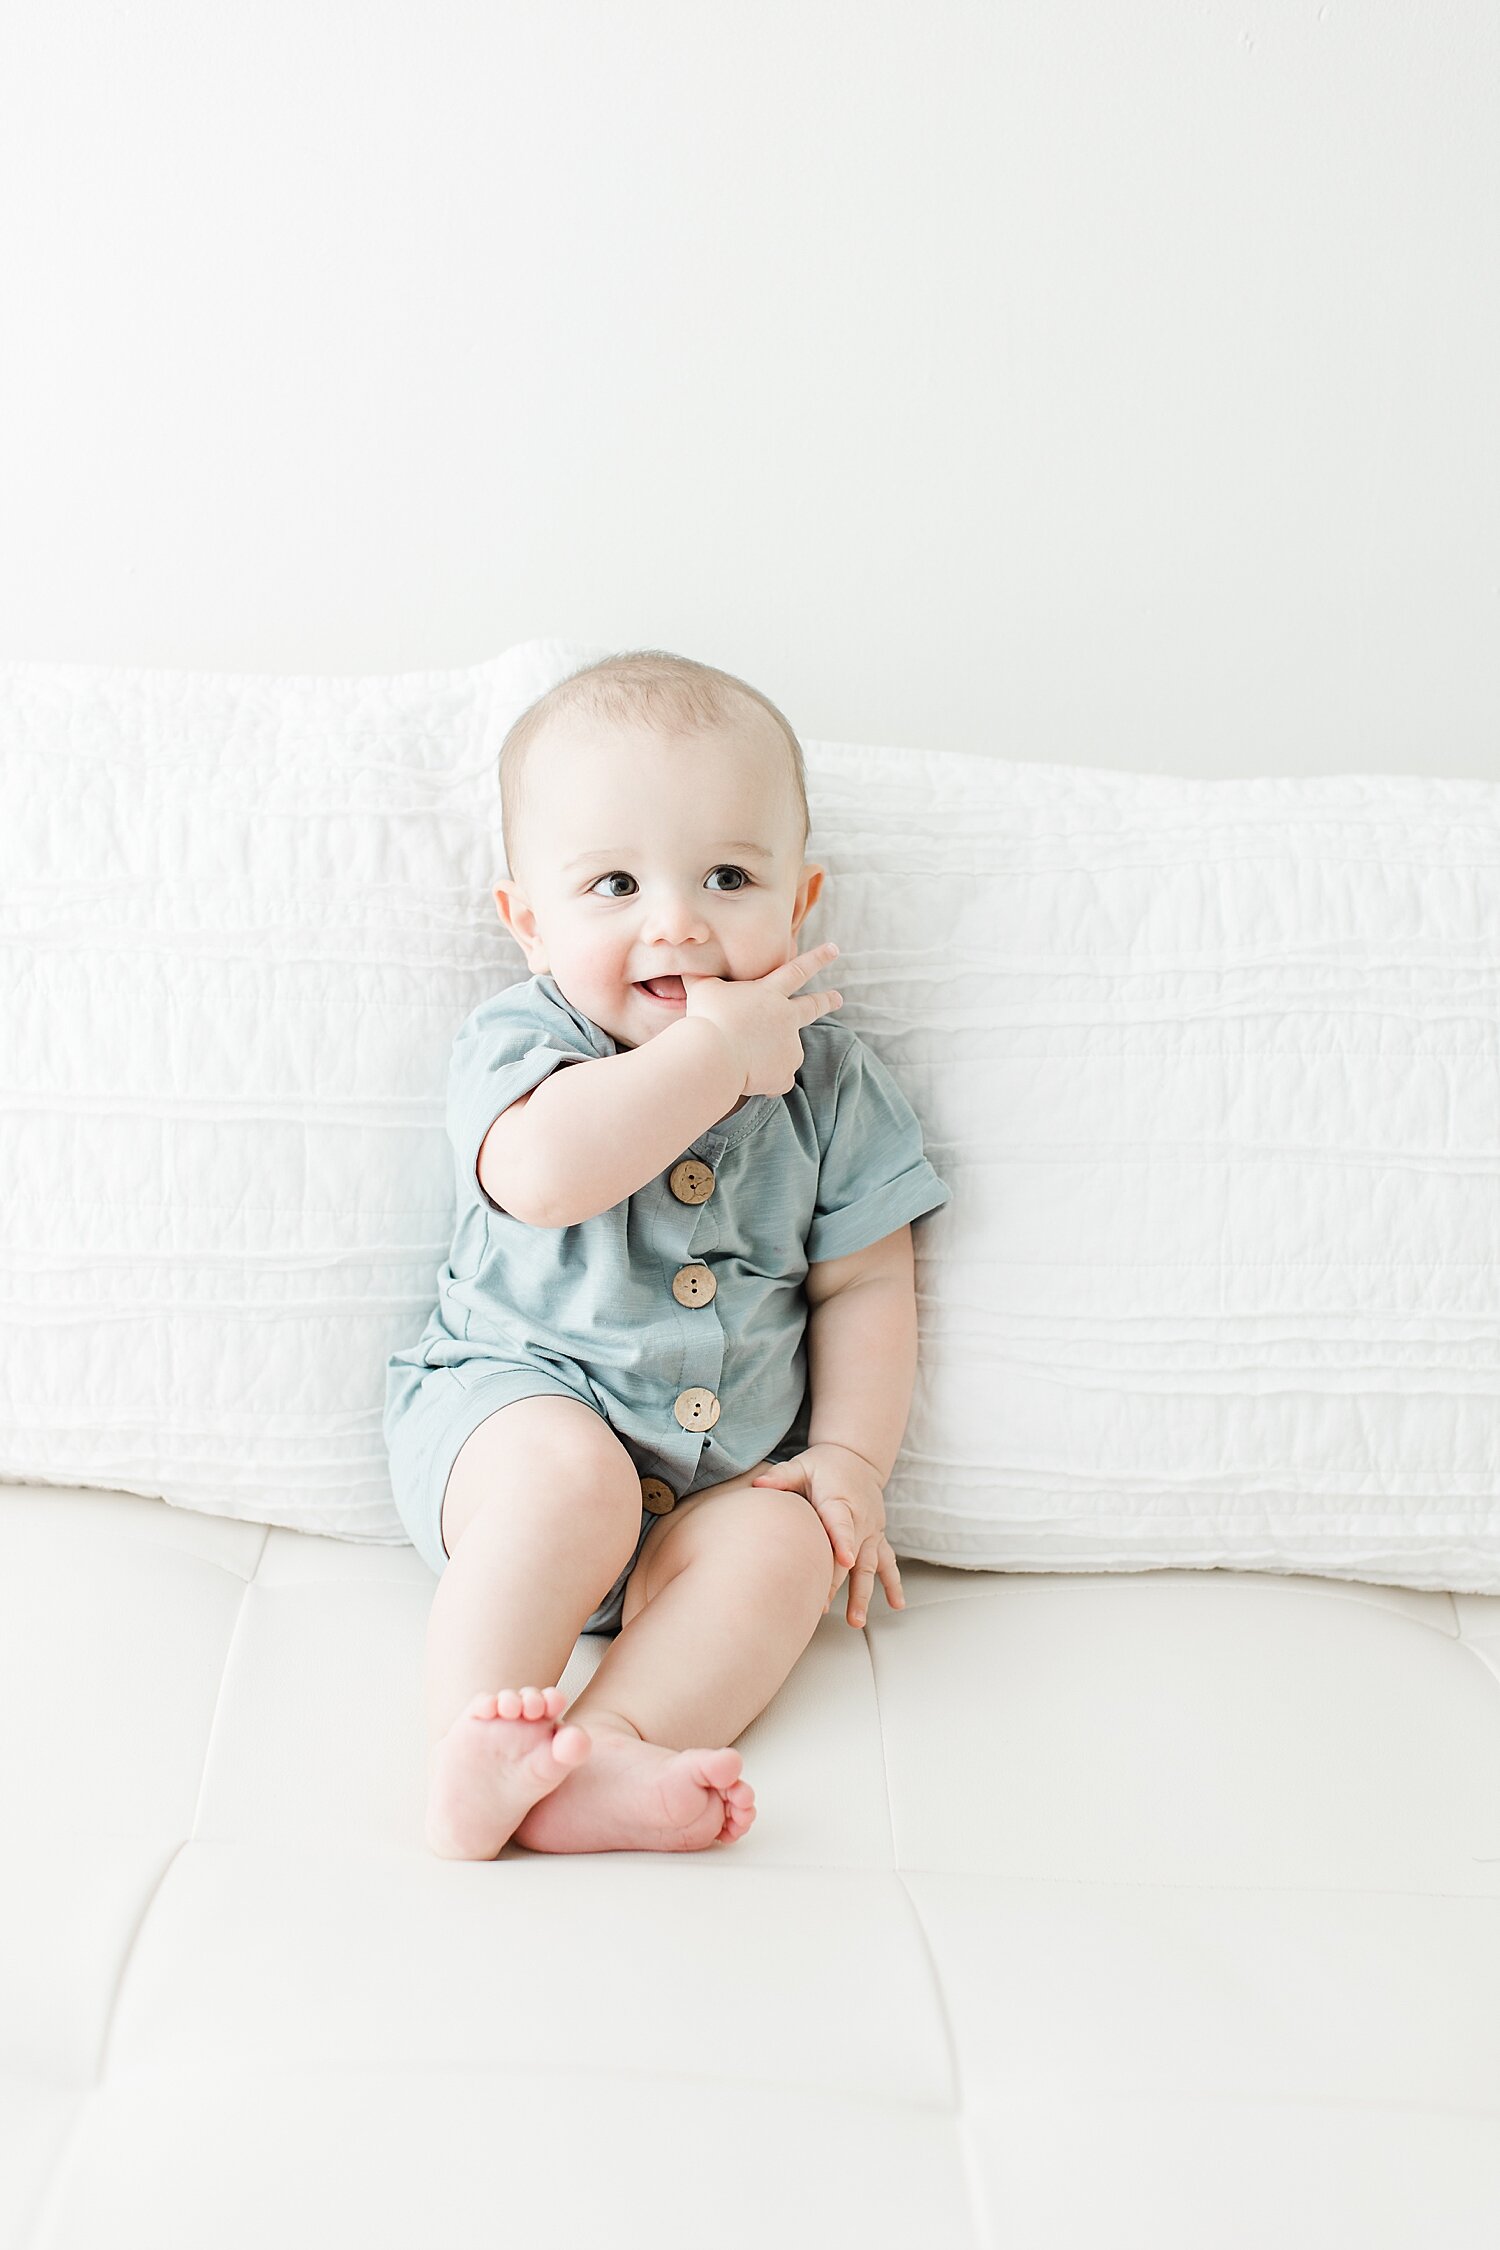 6 month milestone sitter session. Baby has his hands in his mouth smiling. Photos by Kristin Wood Photography.